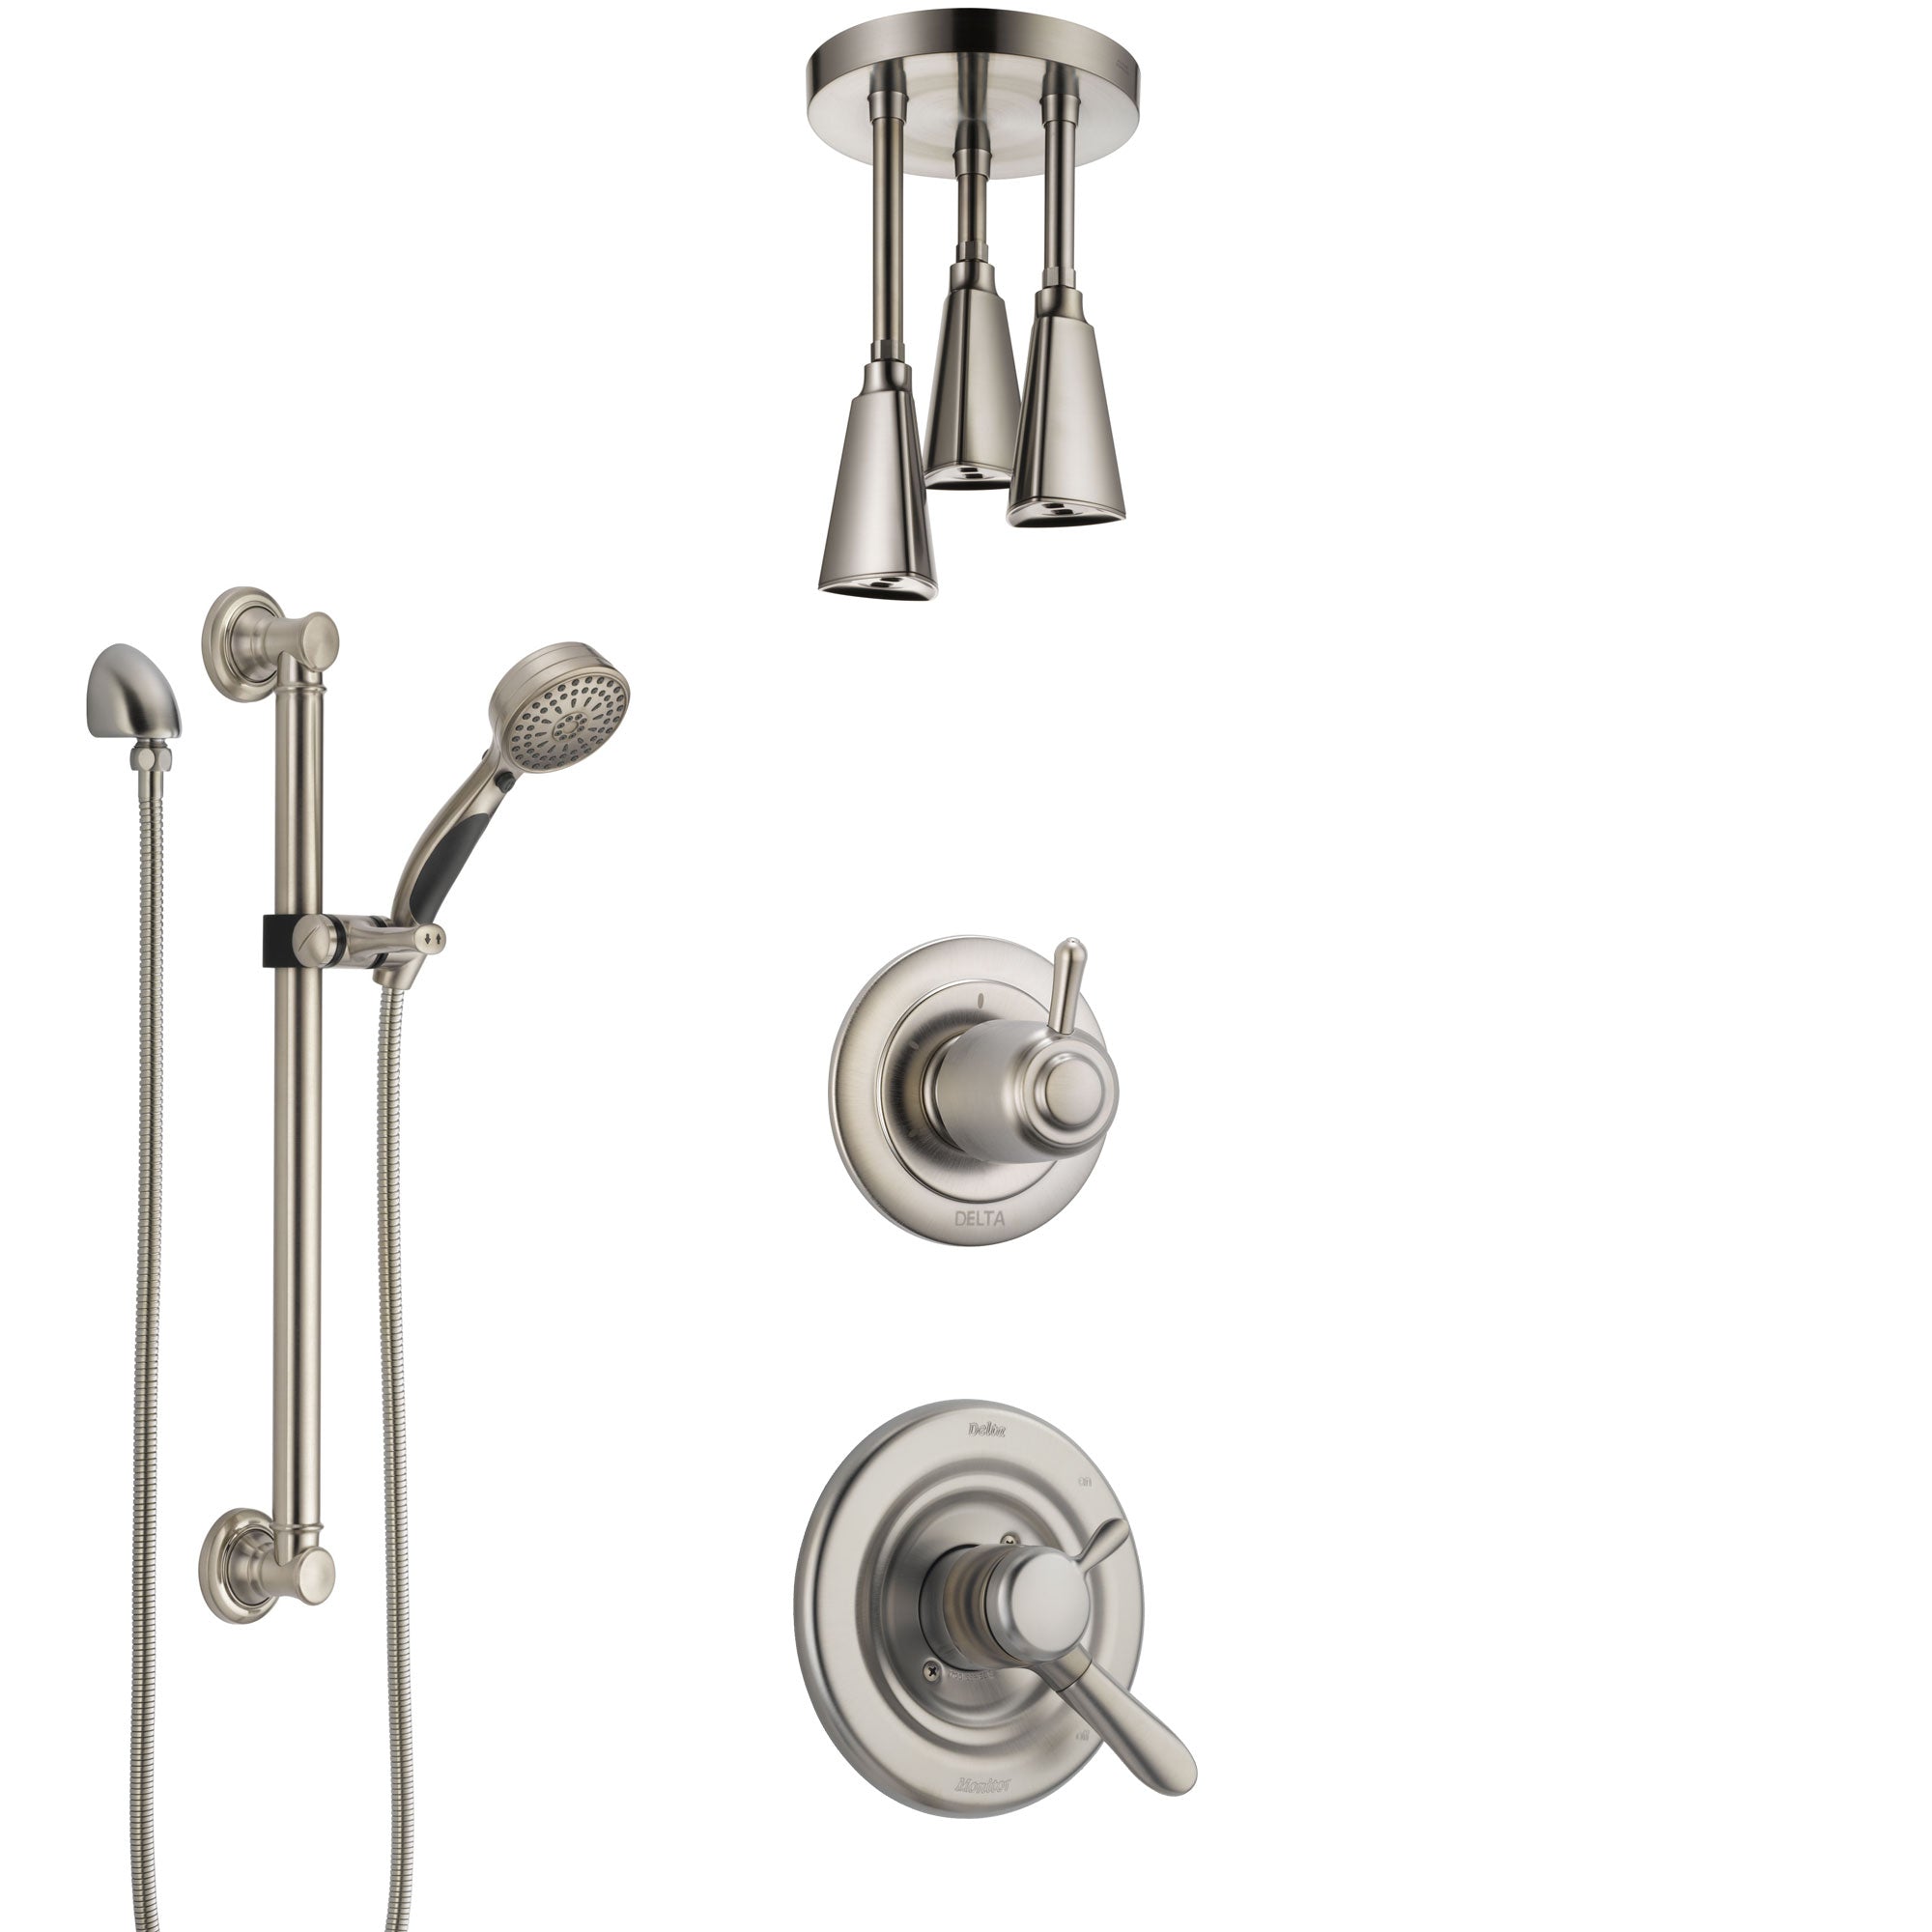 Delta Lahara Dual Control Handle Stainless Steel Finish Shower System, Diverter, Ceiling Mount Showerhead, and Hand Shower with Grab Bar SS1738SS7